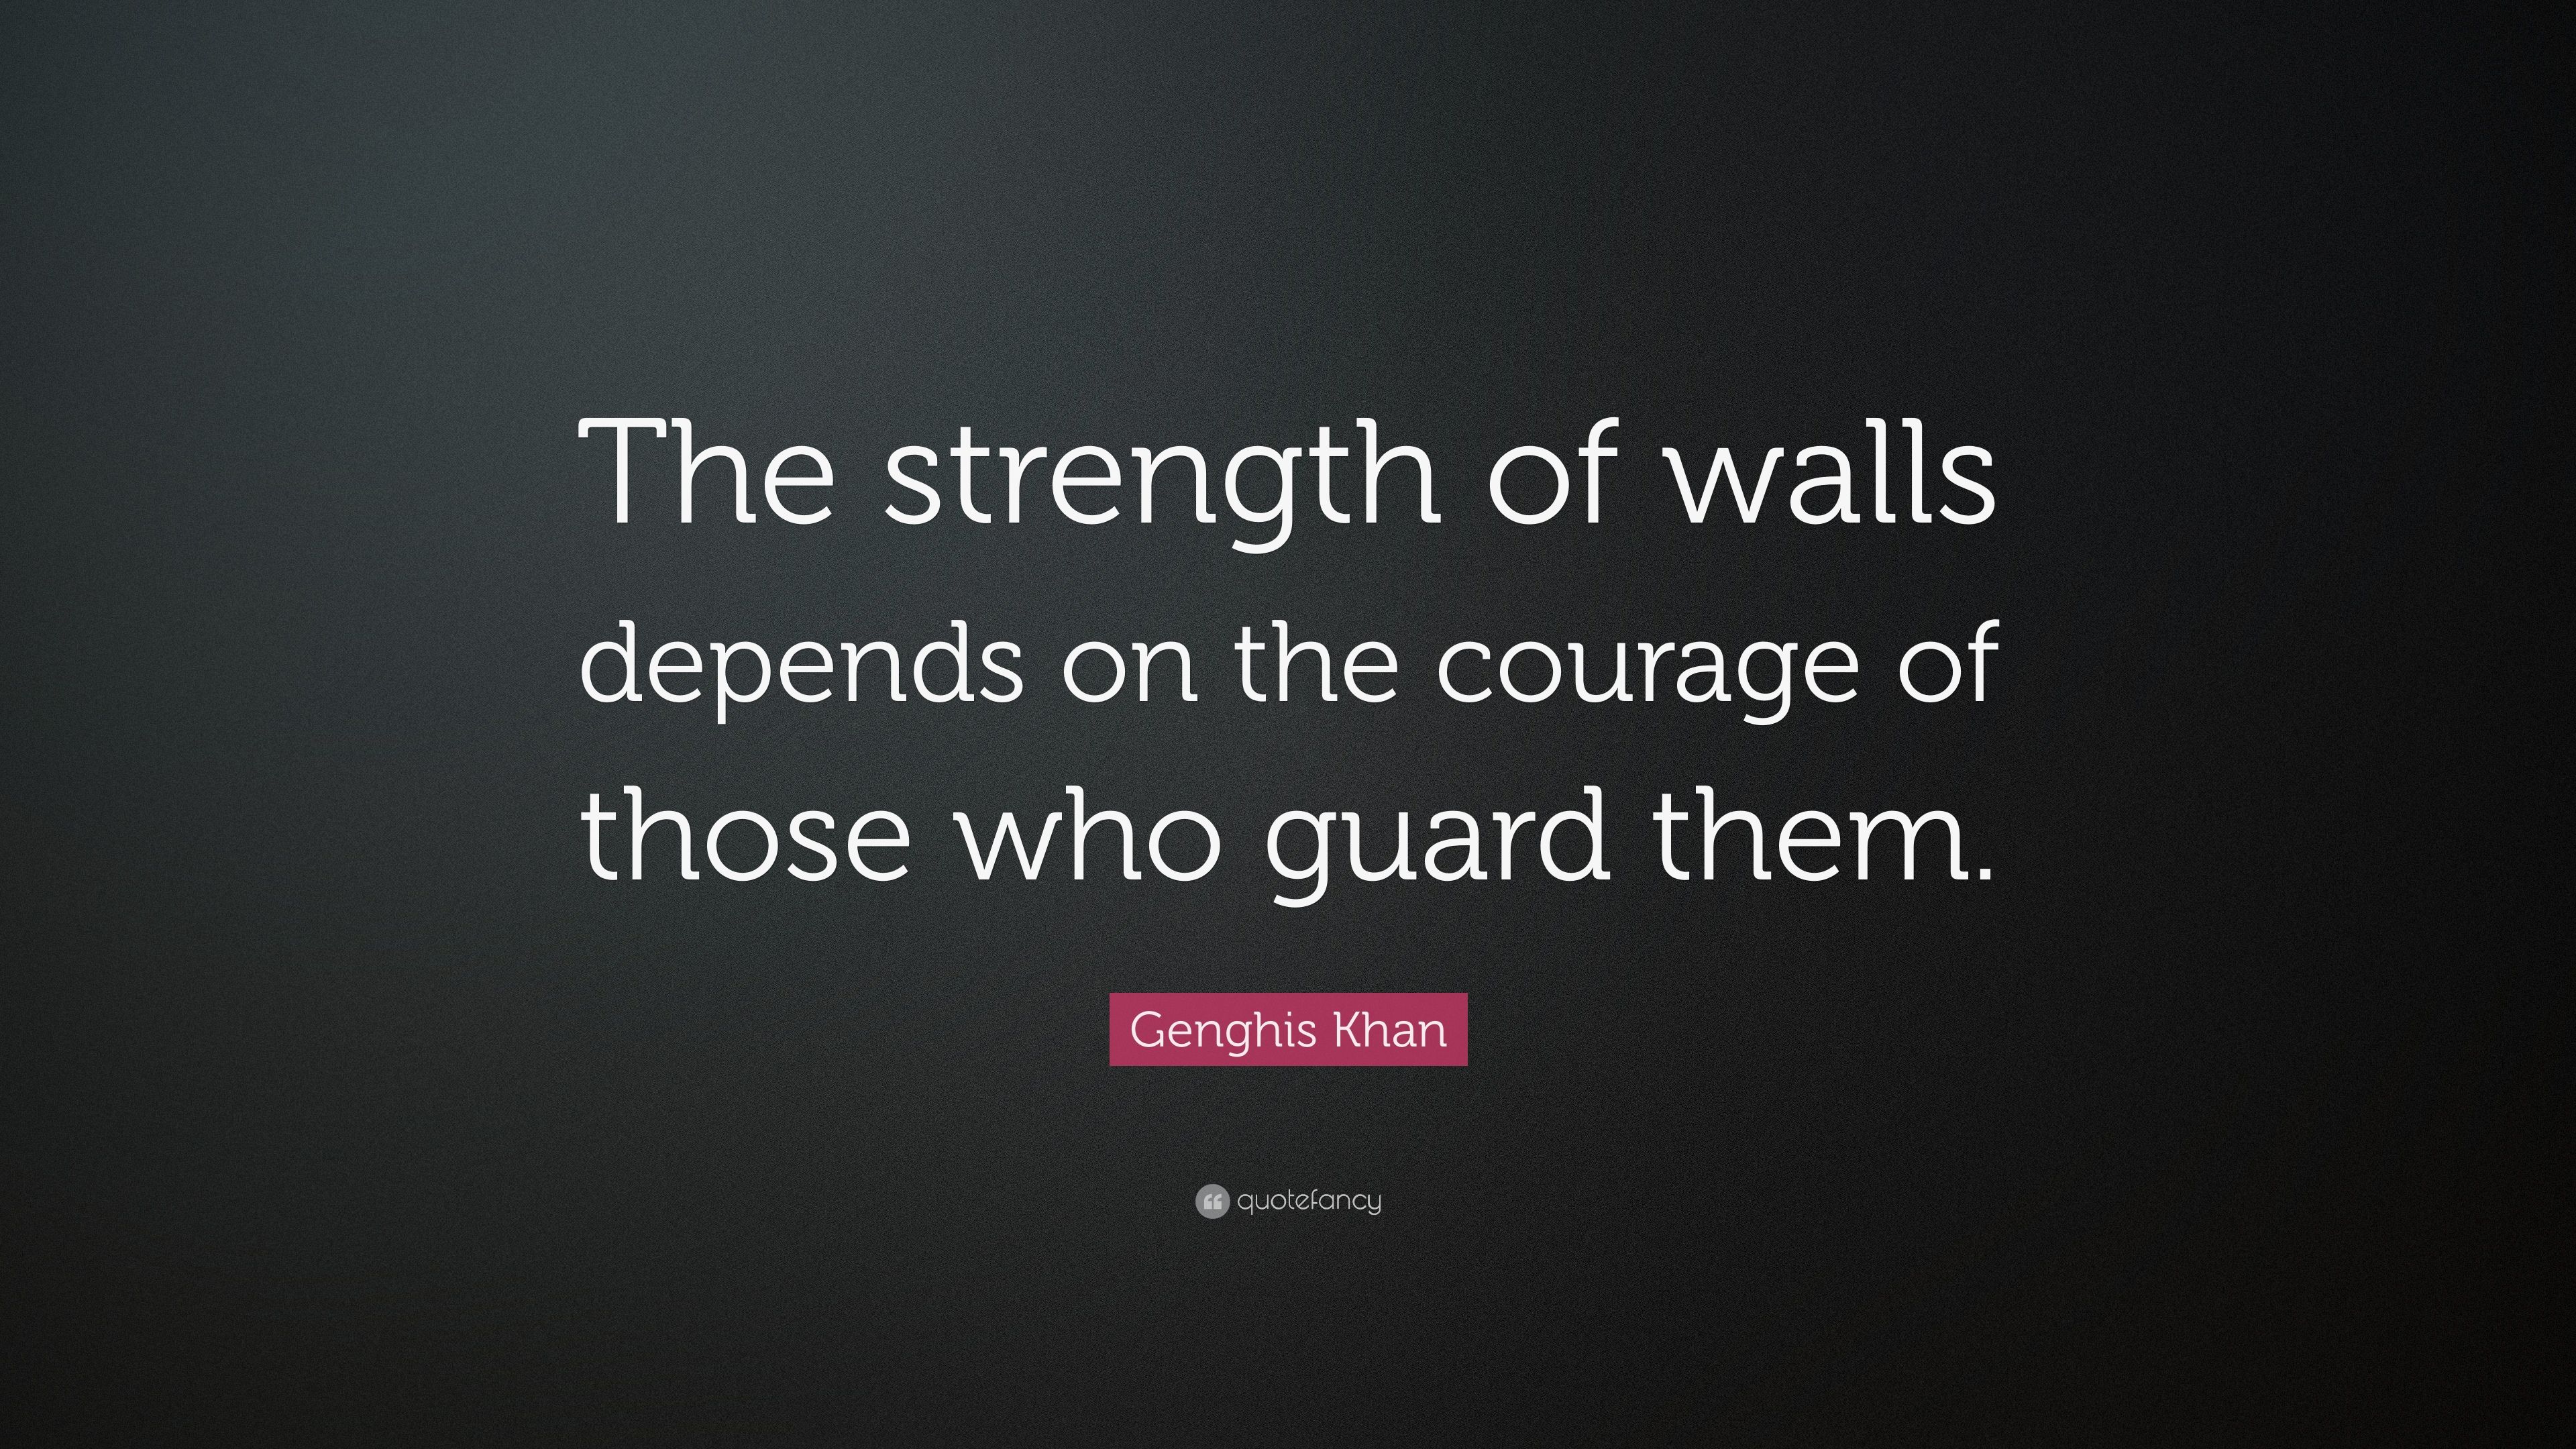 Genghis Khan Quote: “The strength of walls depends on the courage of those who guard them.” (21 wallpaper)